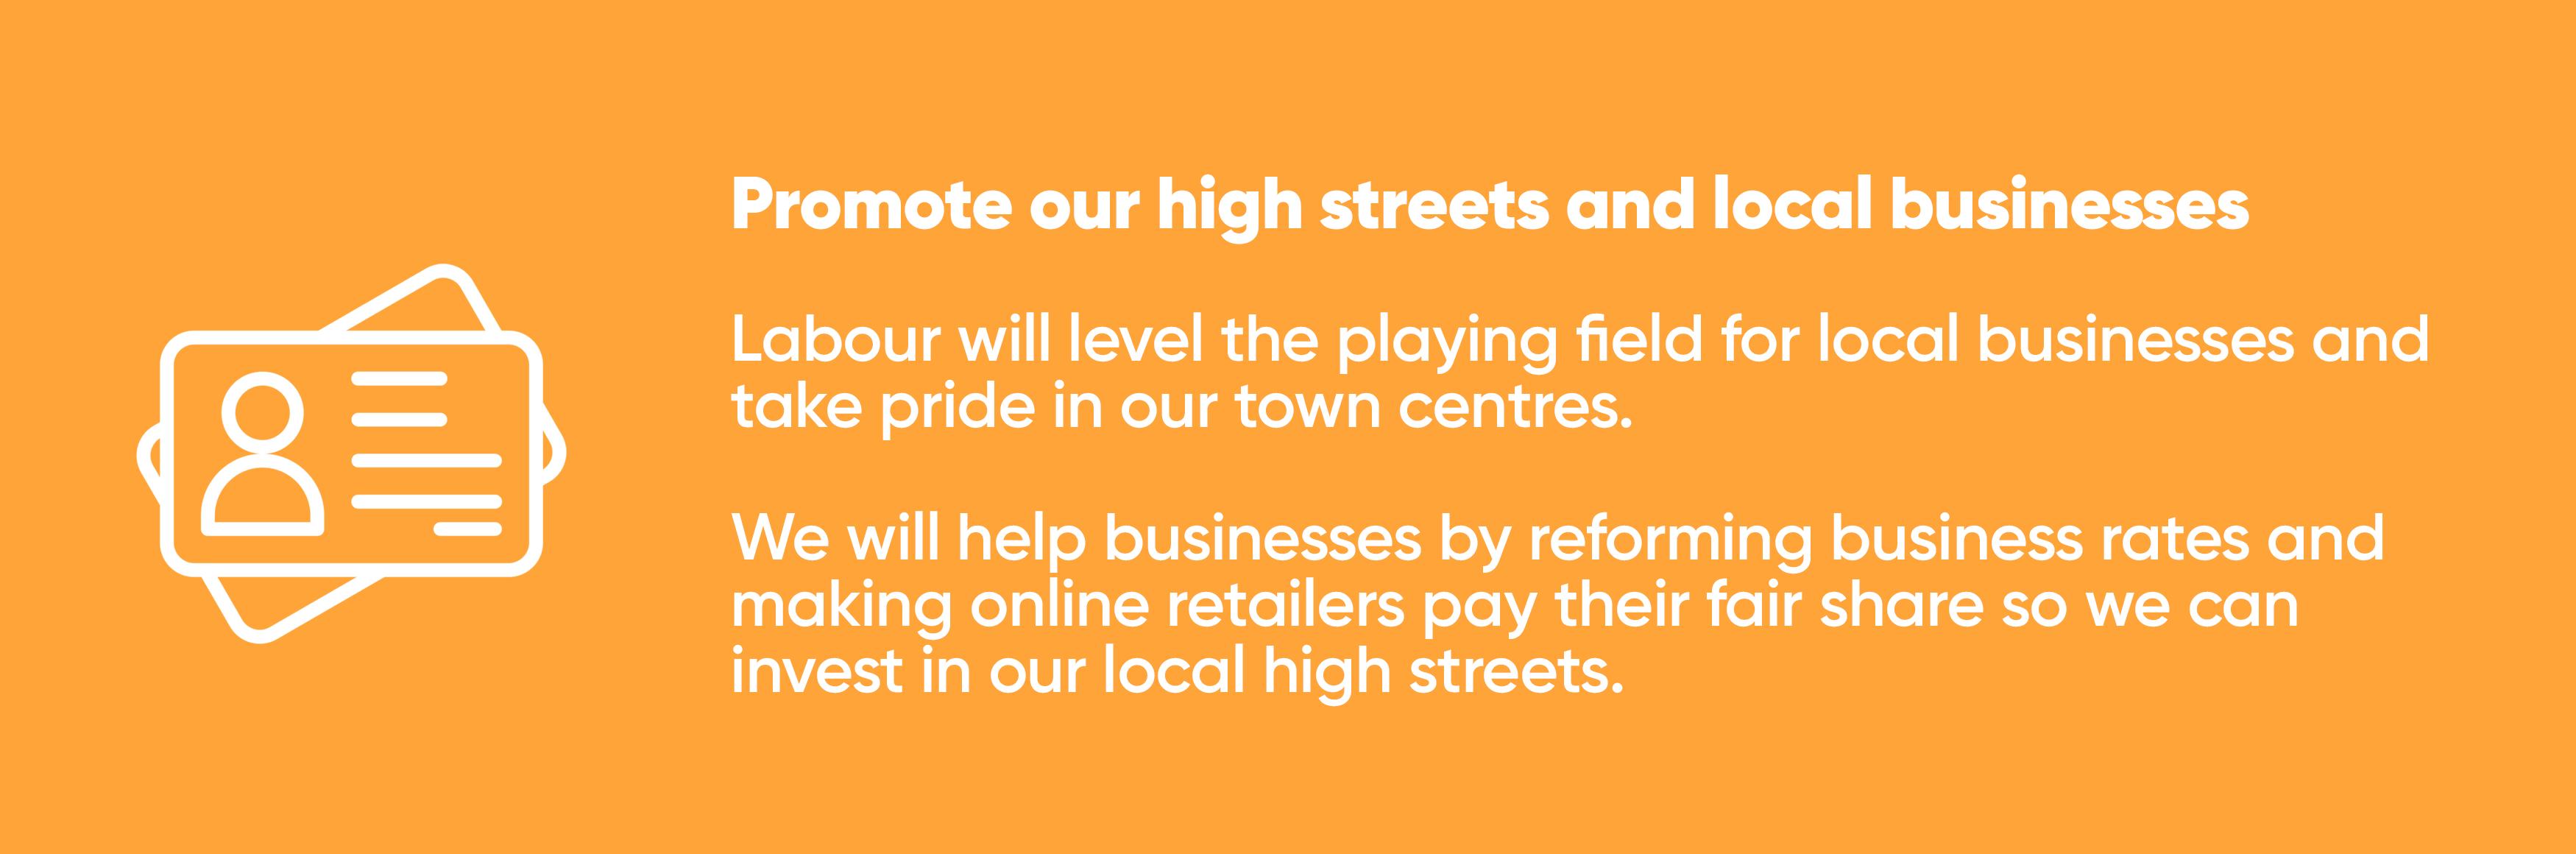 Promote our high streets and local businesses  